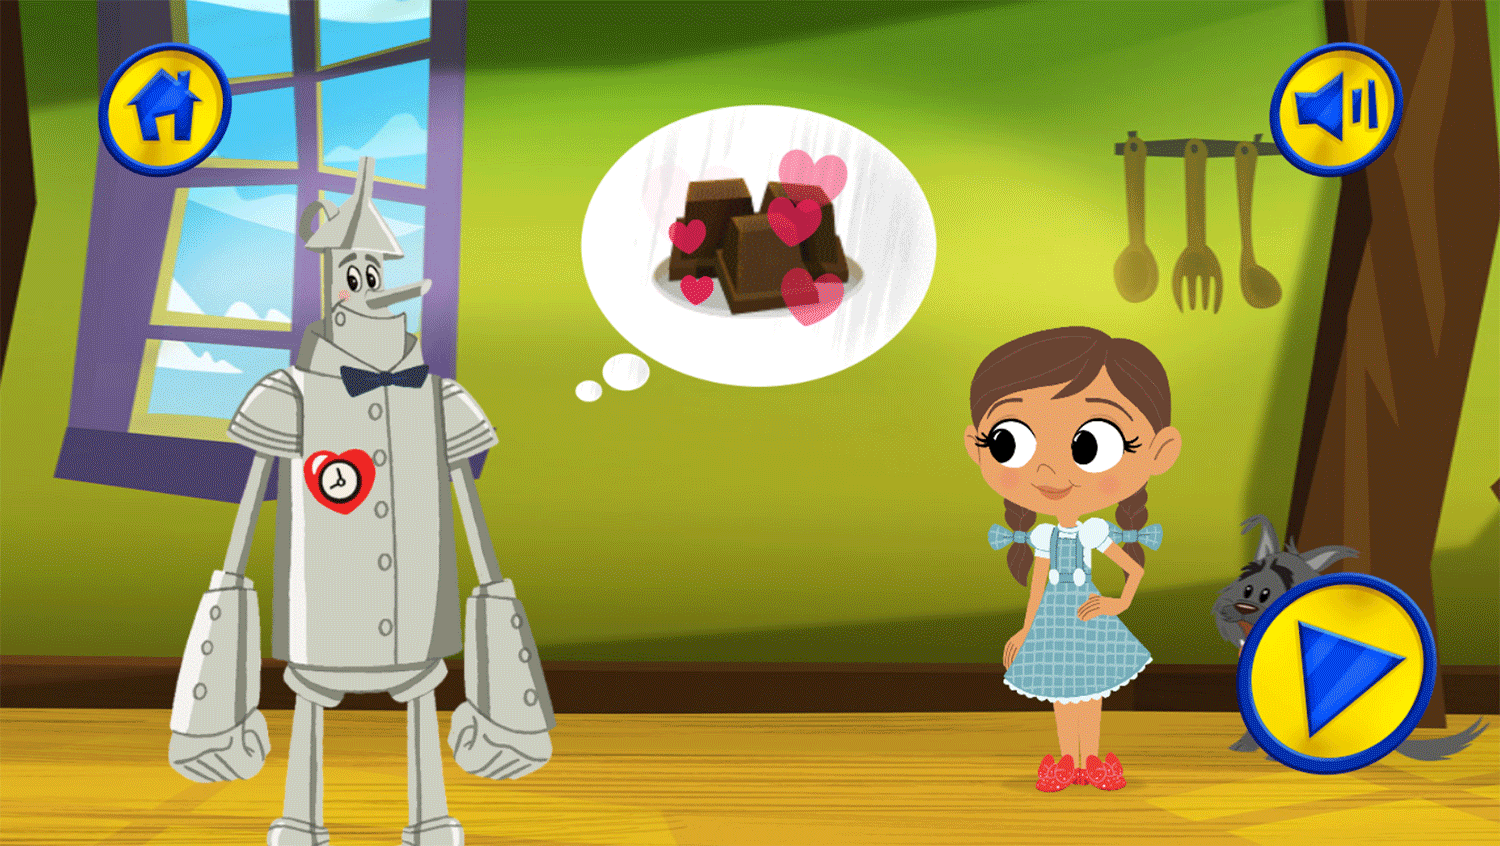 Dorothy and the Wizard of Oz Cookie Magic Game Goal Screenshot.